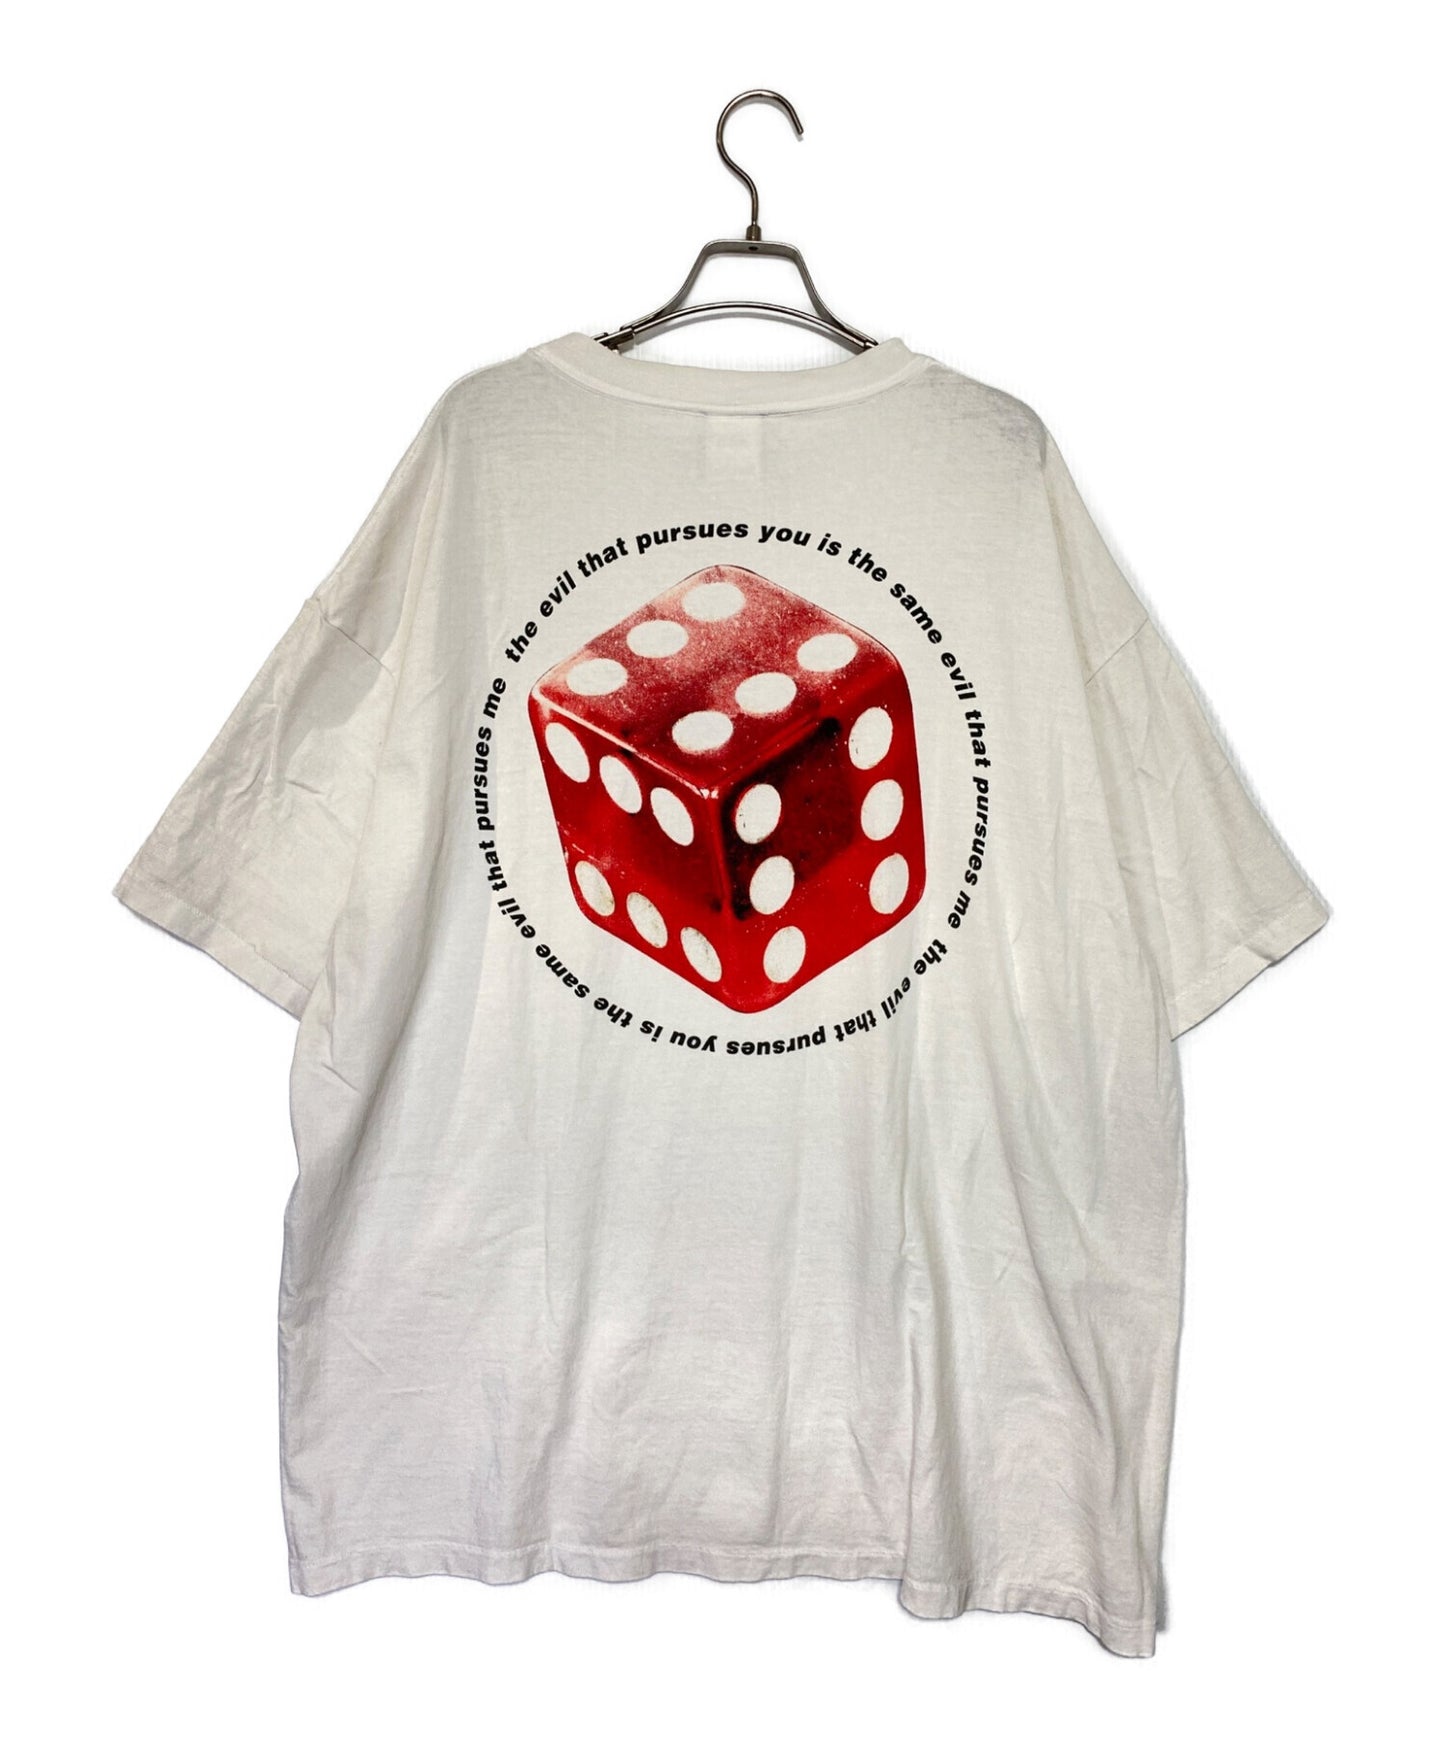 [Pre-owned] SAINT MICHAEL SS TEE/DICE ( Short Sleeve T-shirt Dice ) SM-S23-0000-014